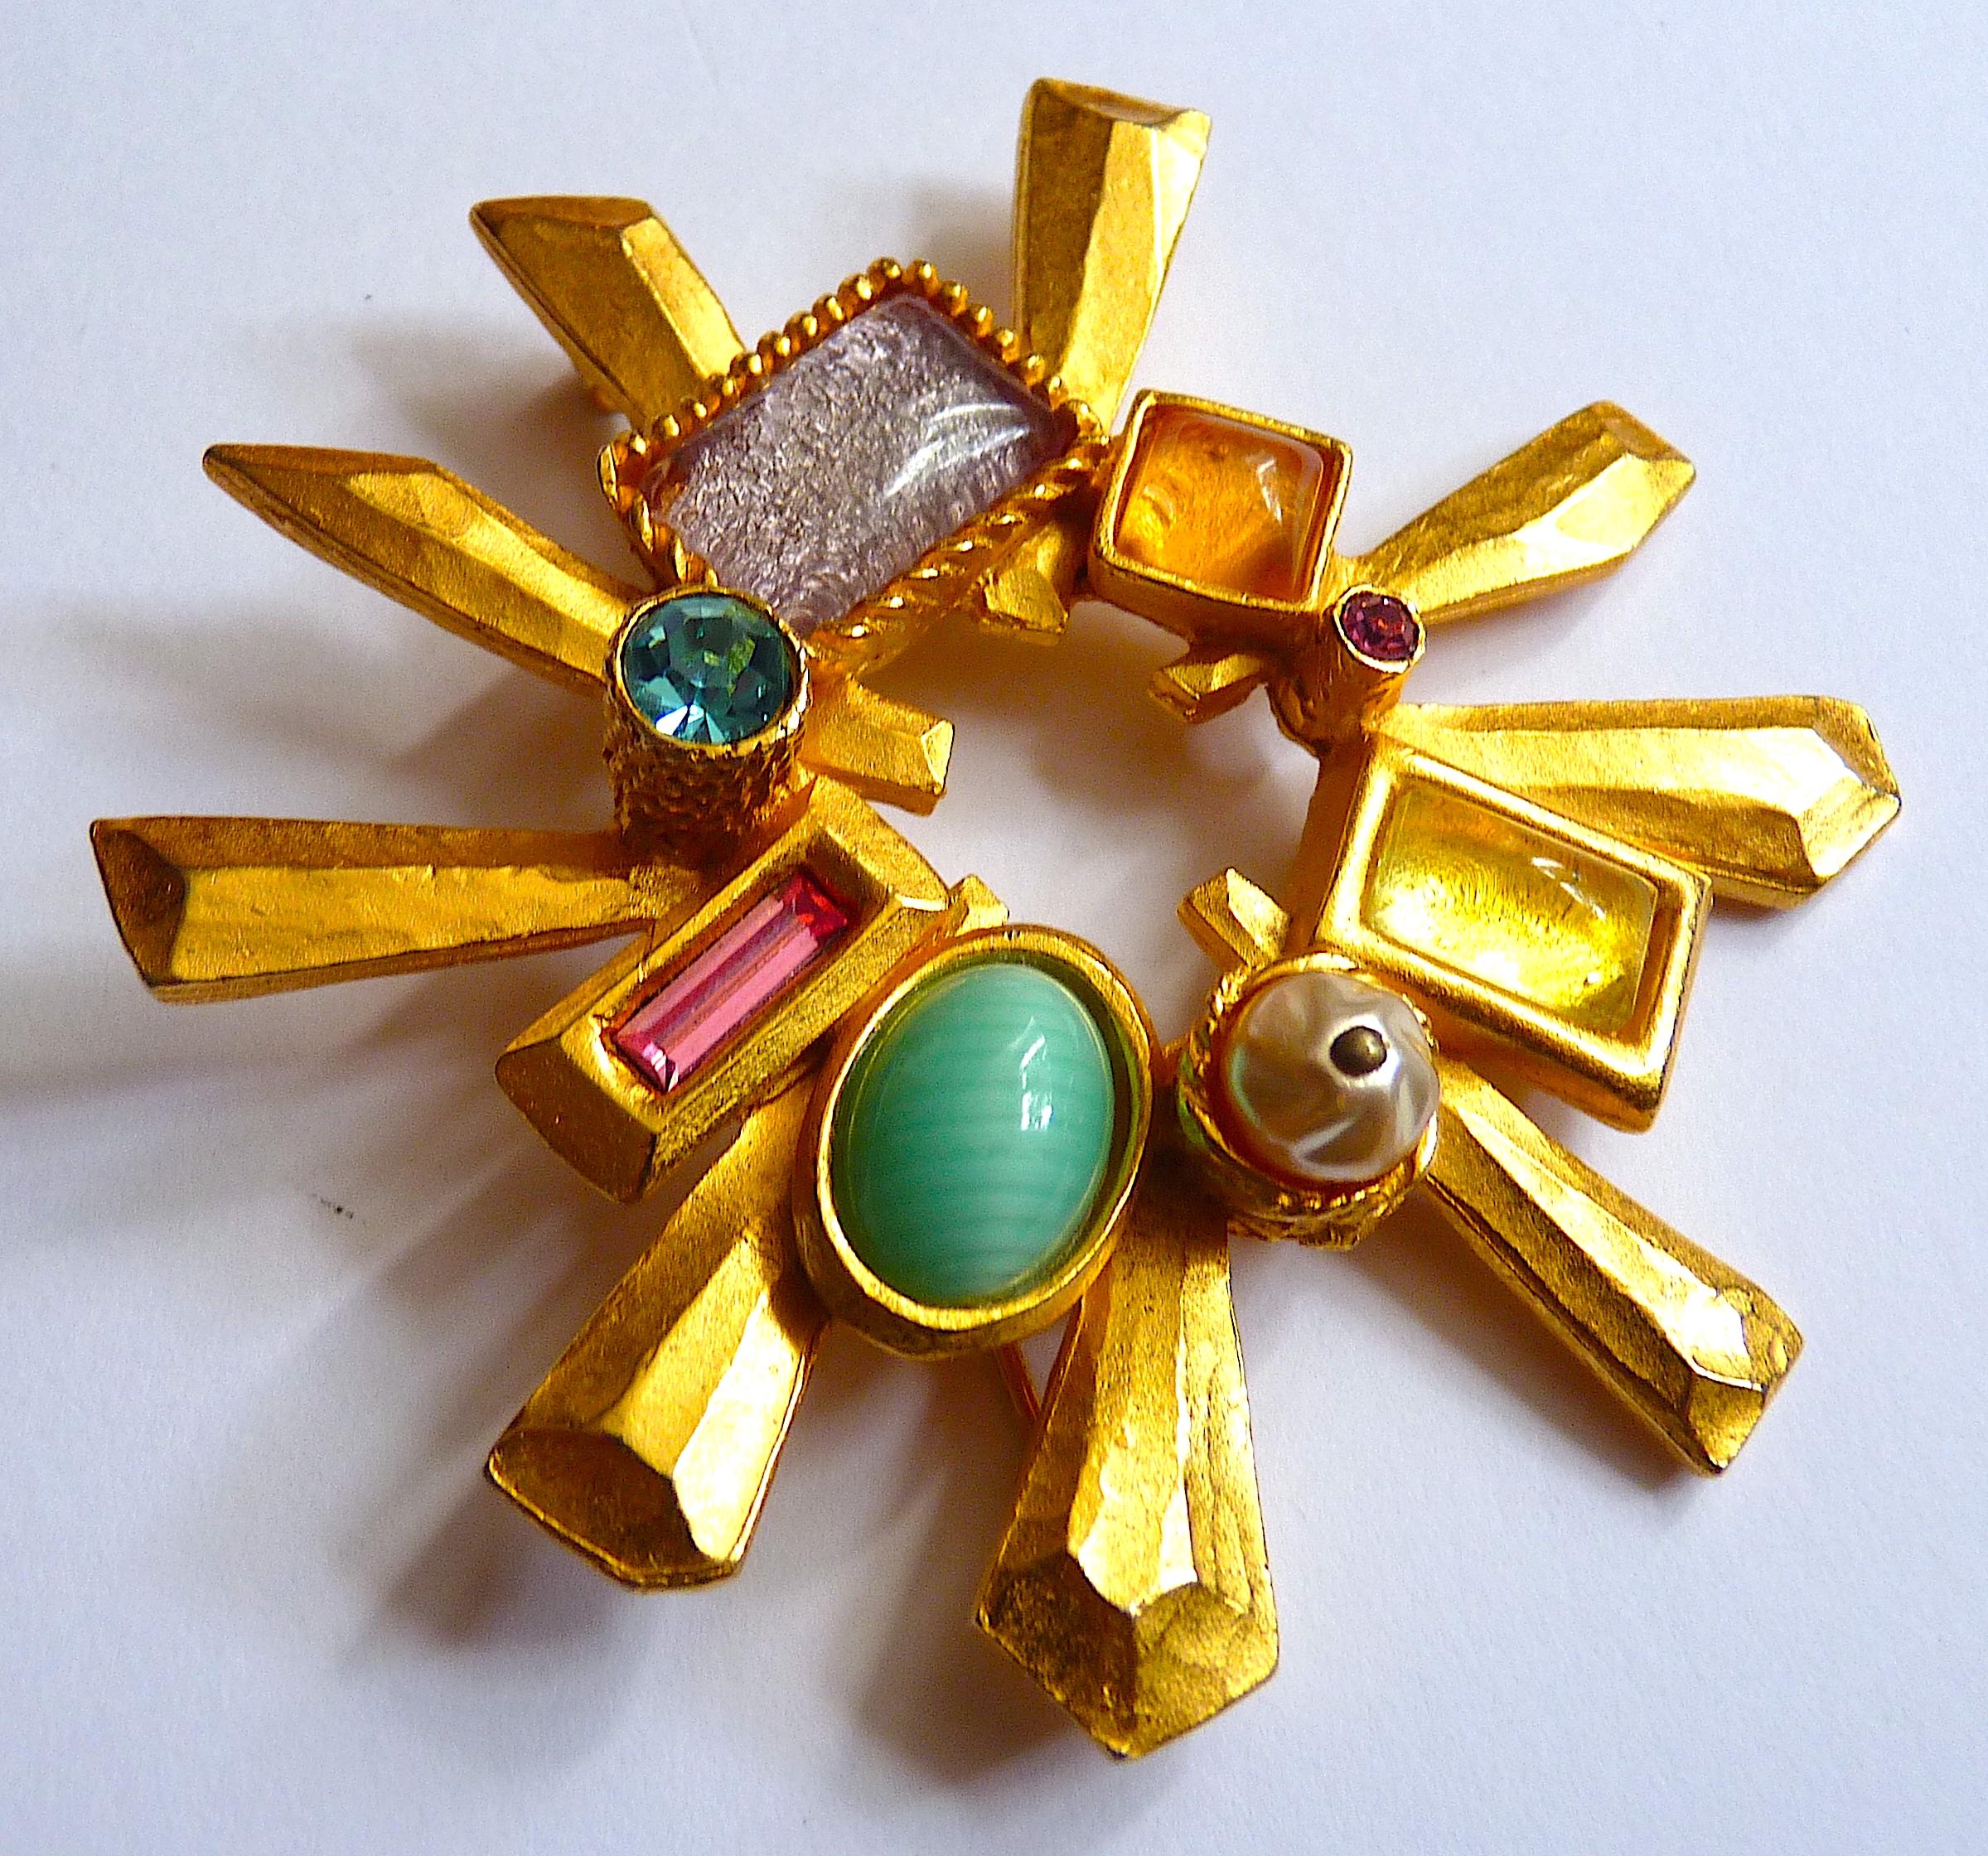 Ultra Rare Lacroix Brooch, Gold Plated Metal, Poured Glass and Glass Crystals, Vintage from the 90s. Ultra Collectible !

Stamped at back CHRISTIAN LACROIX Made in France

CONDITION : Excellent  Condition !

Measurements : around 8 x 8 cm

An